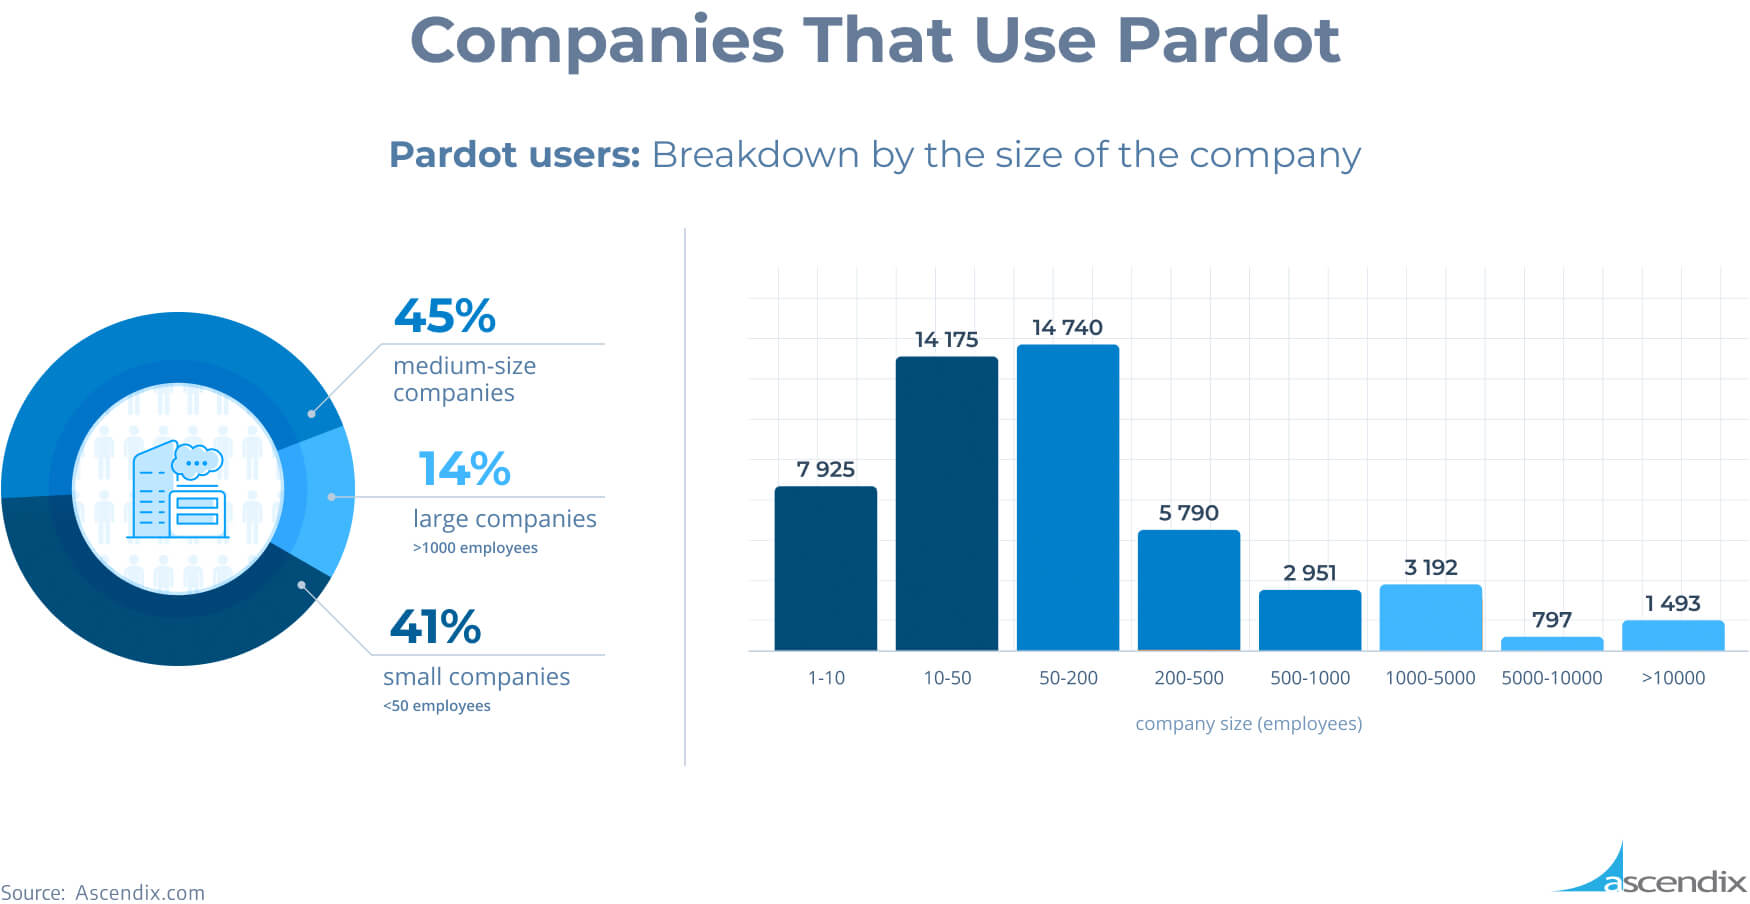 statistics showing who uses pardot. breakdown by the number of employees and the size of the company